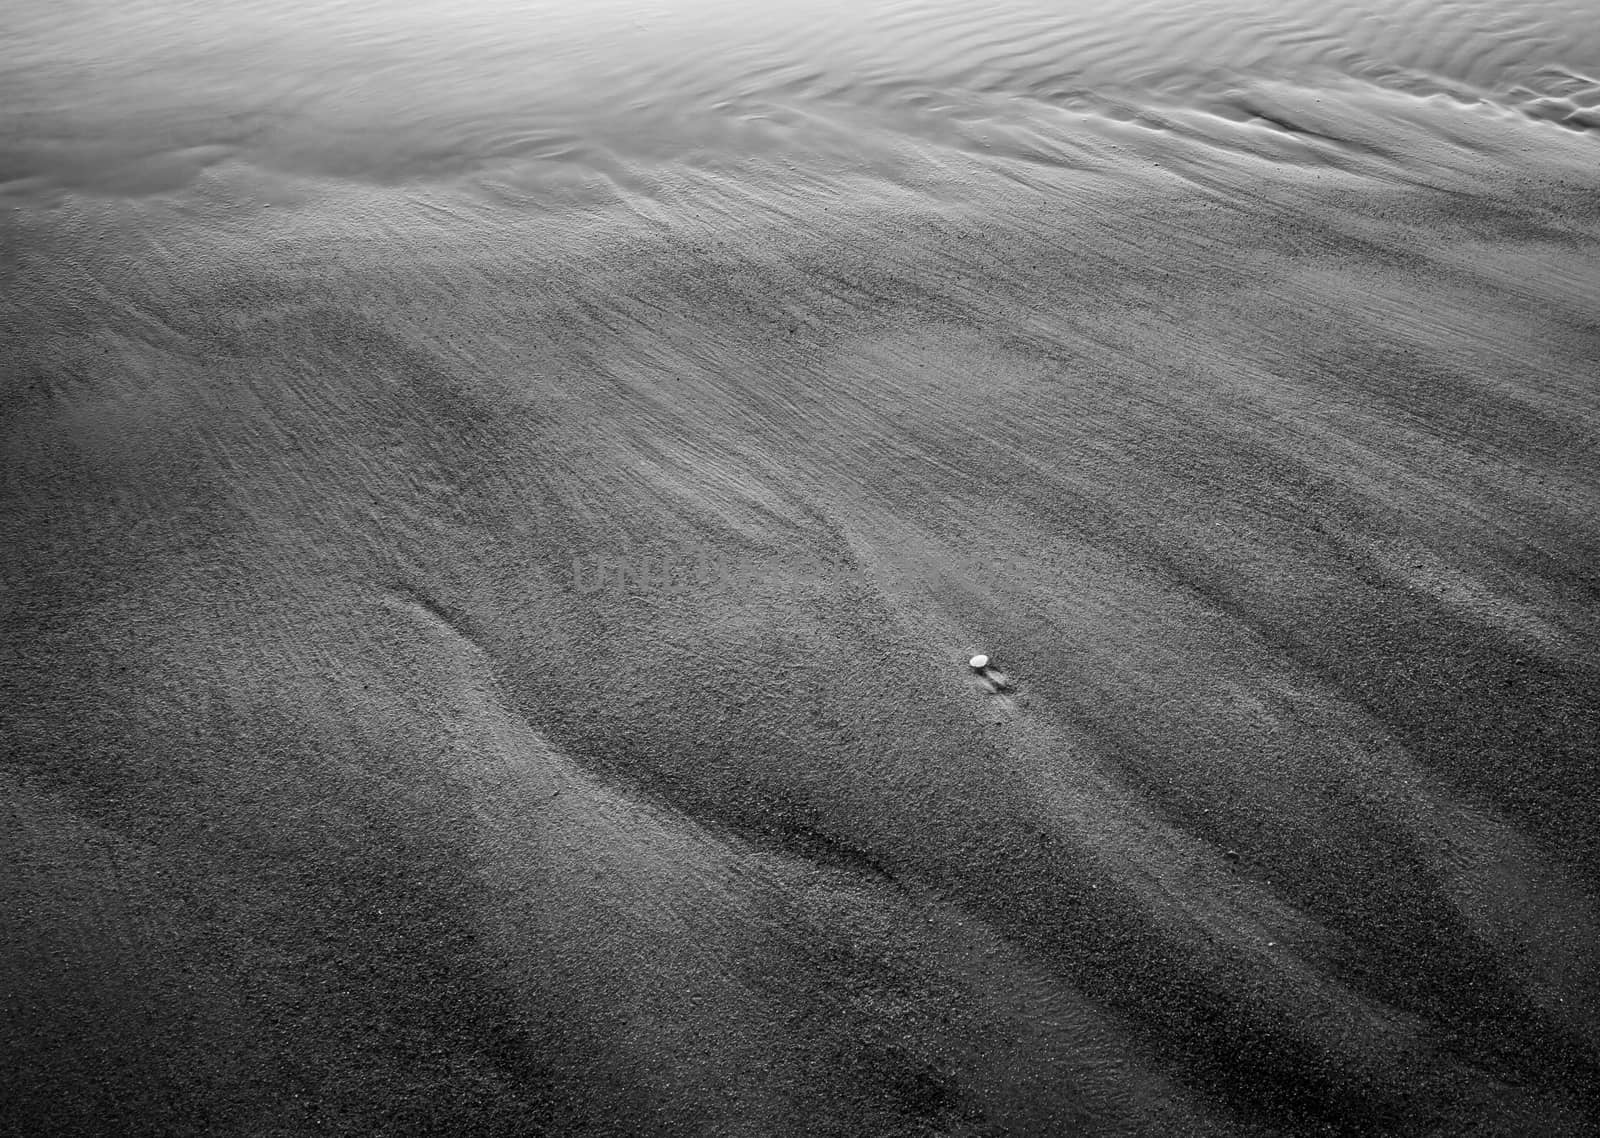 A lonely shell on the beach. The picture is black and white.